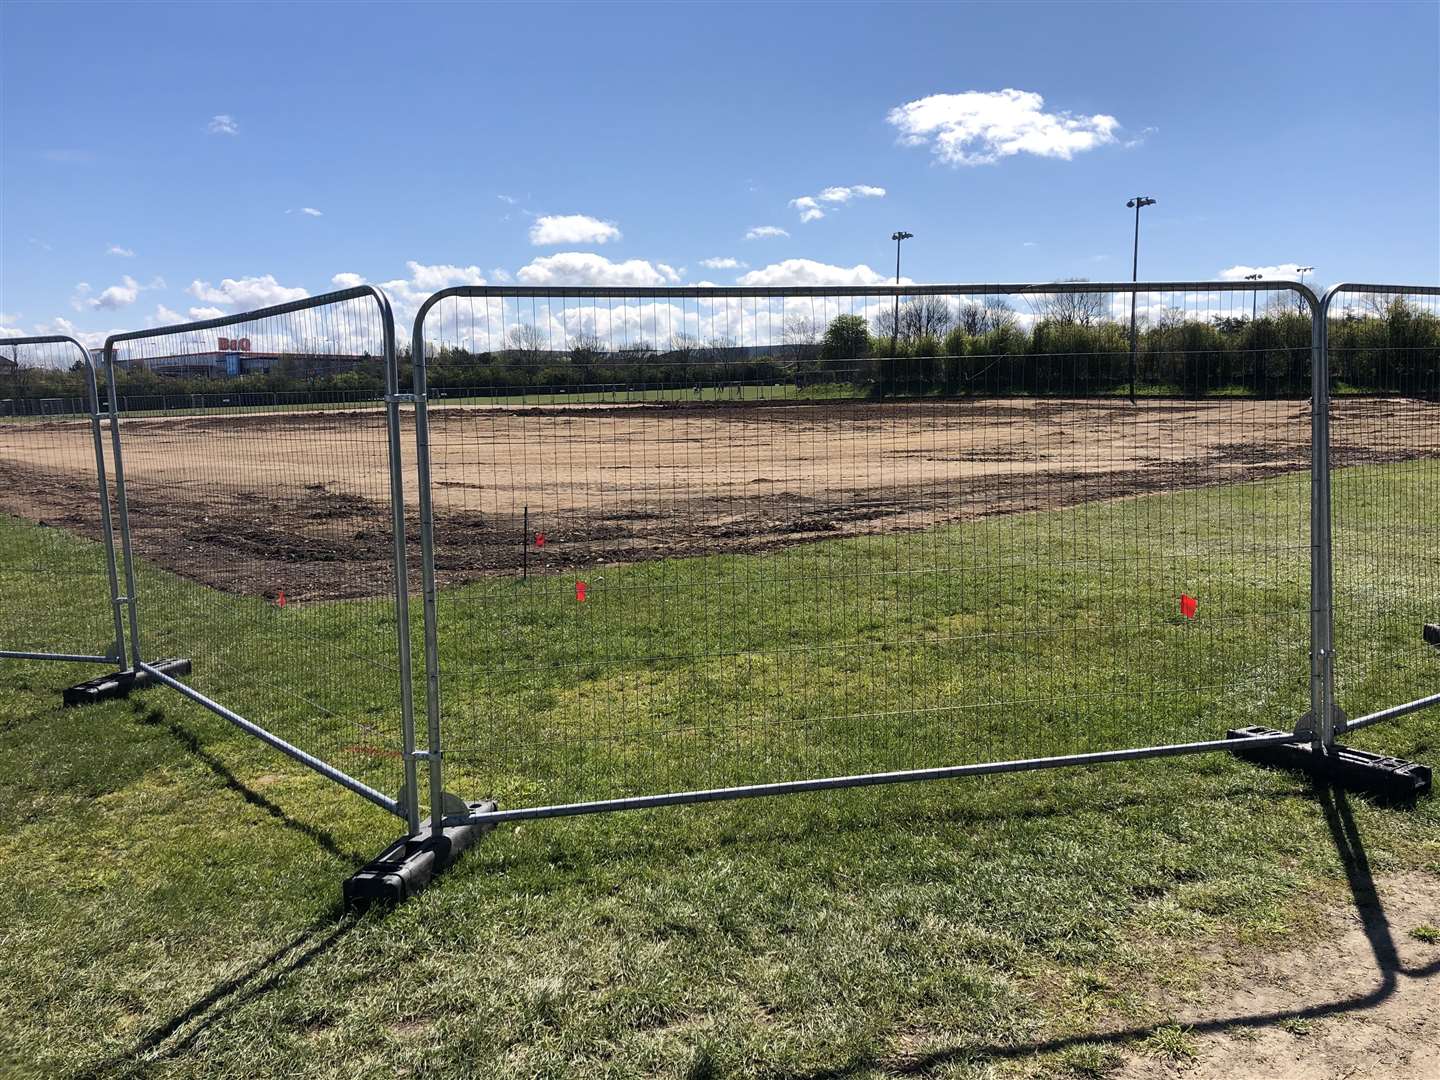 The site of the new £1.3million pitch